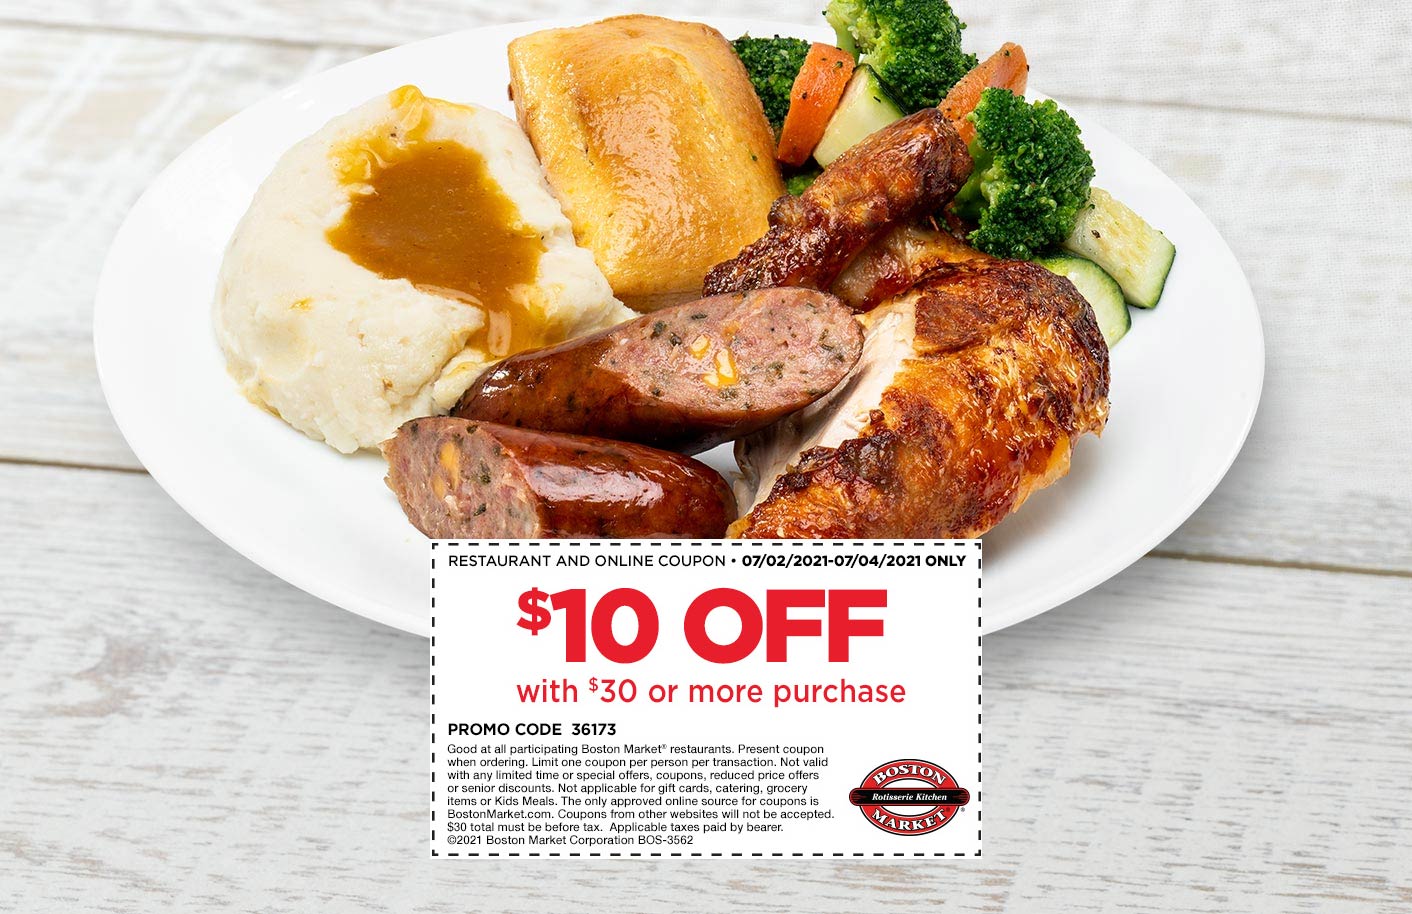 Boston Market restaurants Coupon  $10 off $30 today at Boston Market restaurants #bostonmarket 